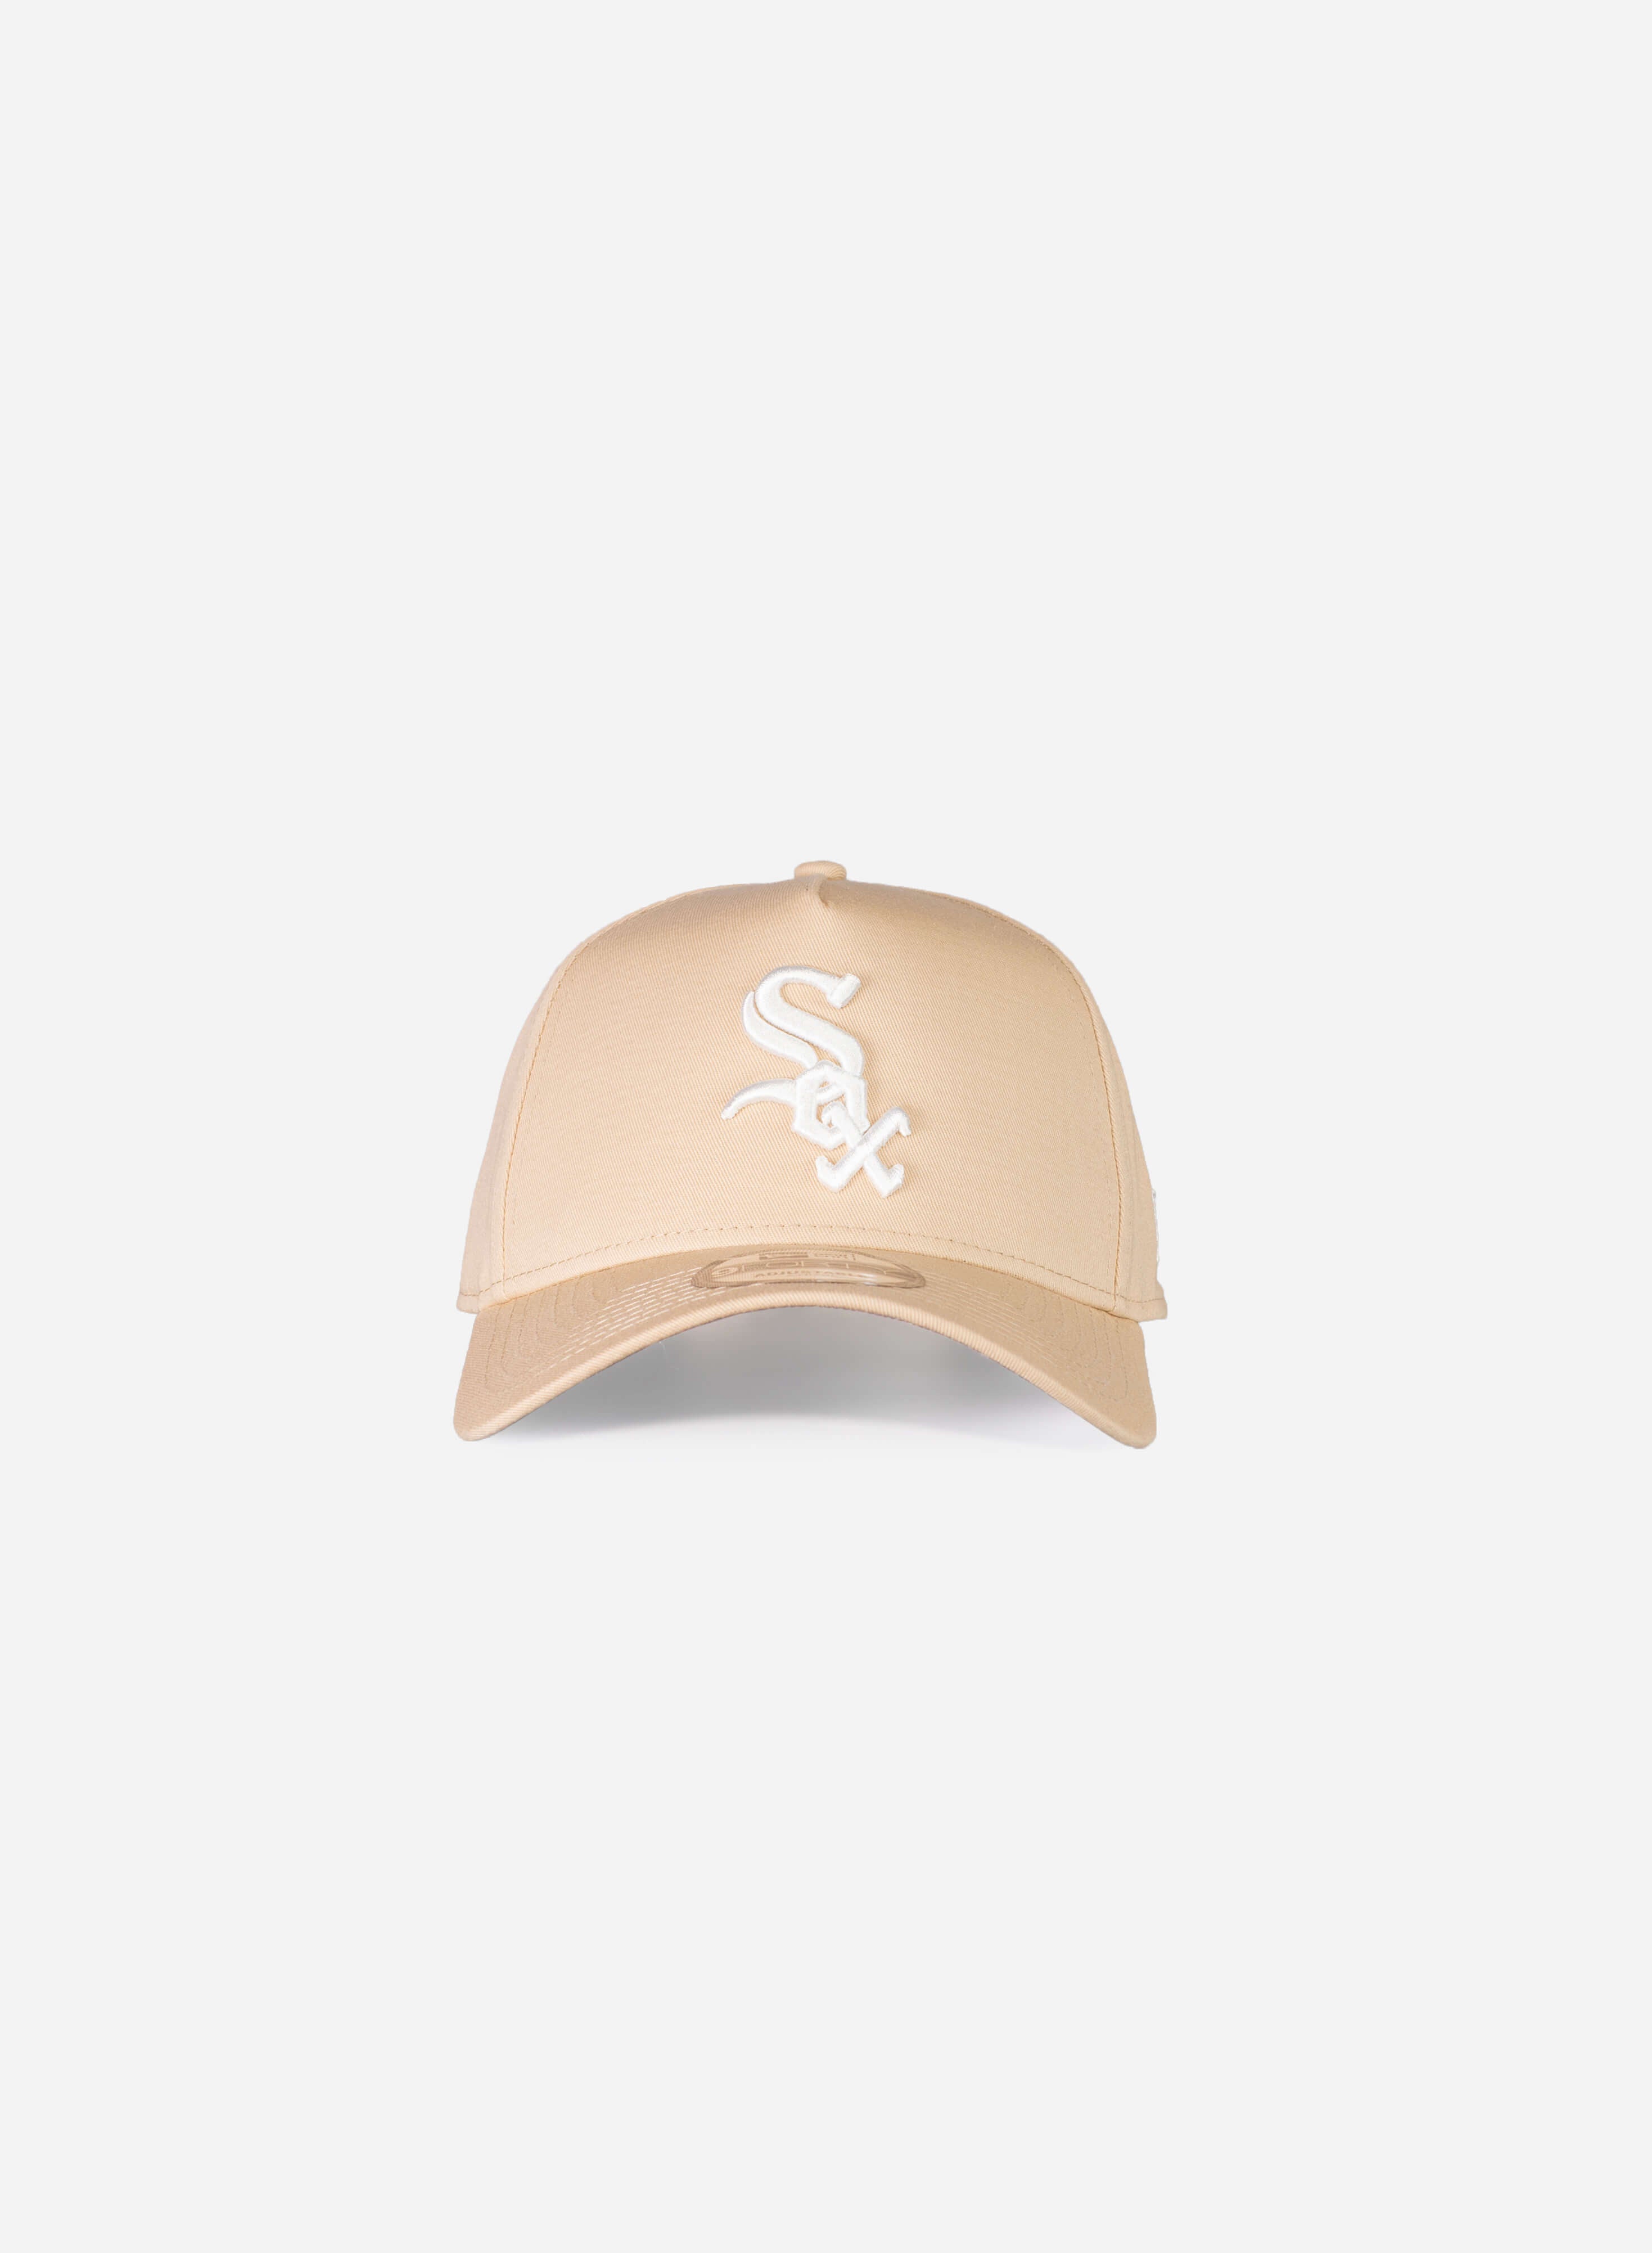 Chicago White Sox Oatmilk 9Forty A-Frame Snapback